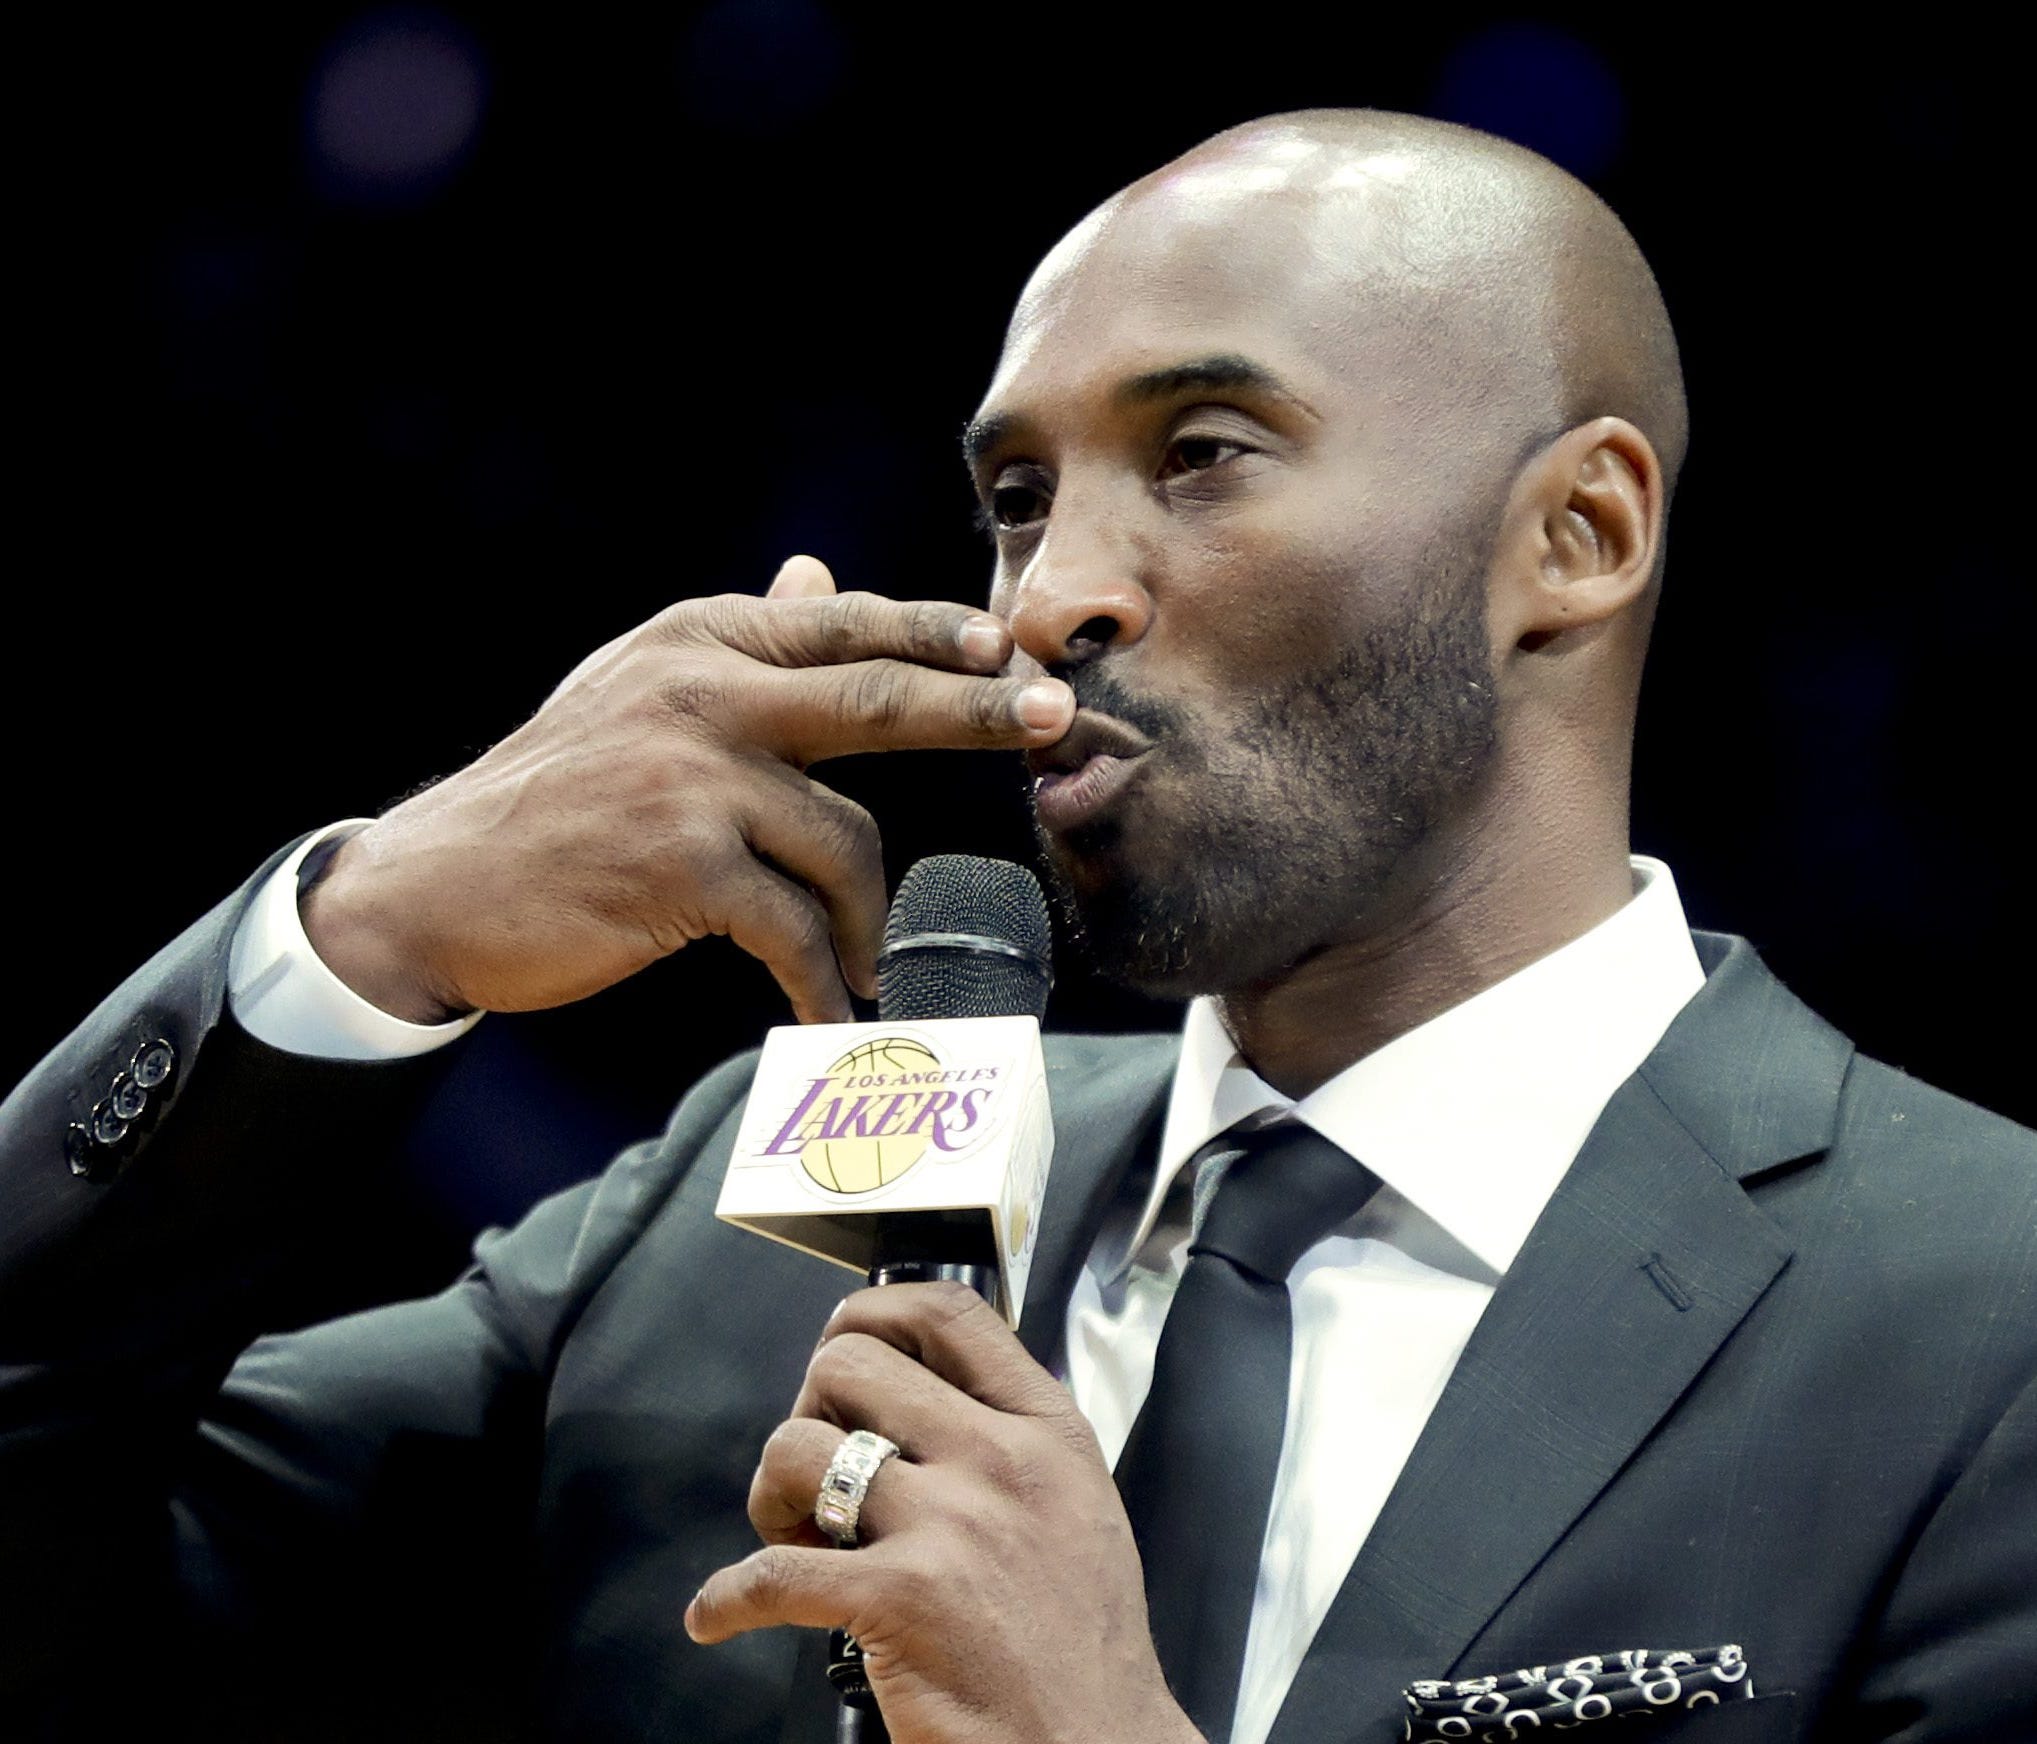 Former Los Angeles Laker Kobe Bryant speaks during a halftime ceremony retiring both of his jersey's during an NBA basketball game between the Los Angeles Lakers and the Golden State Warriors in Los Angeles, Monday, Dec. 18, 2017. (AP Photo/Chris Car